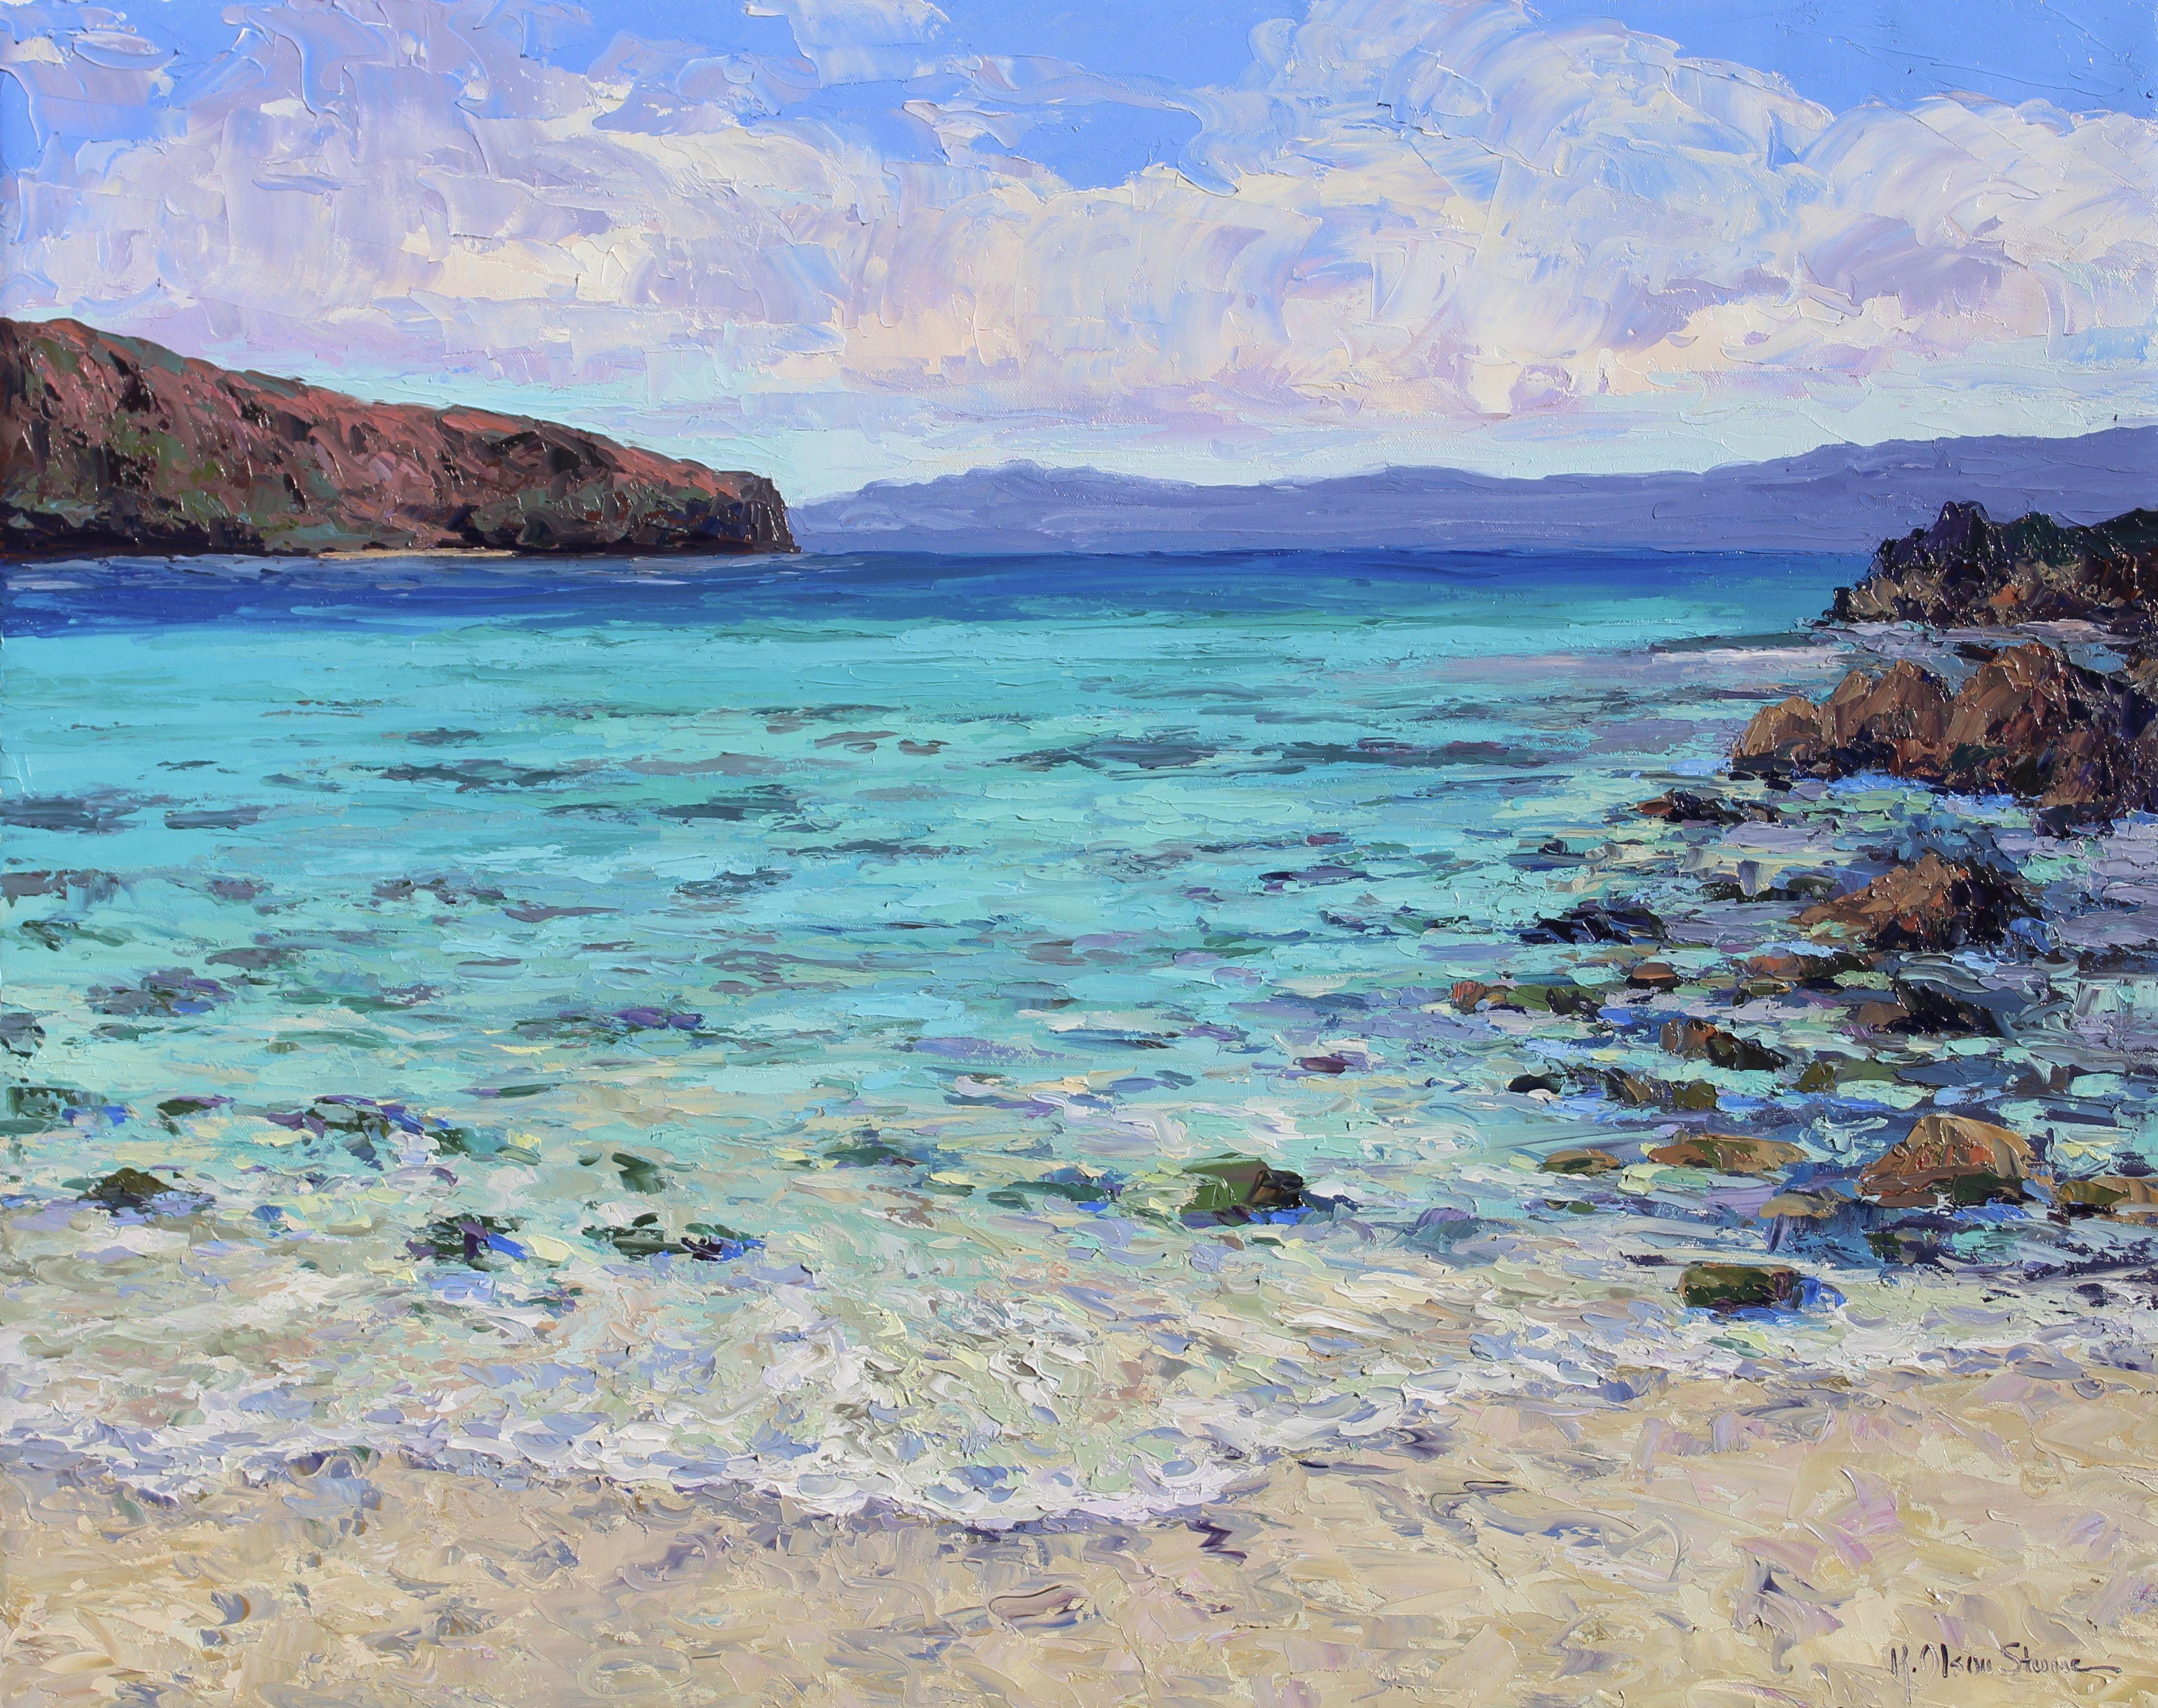 An original seascape of Baja, Mexico as seen from Balandra Bay, a UNESCO world heritage site and one of the world's most beautiful bays. The colors of blue are stunning and as you look at this painting, you can almost feel the water moving and see